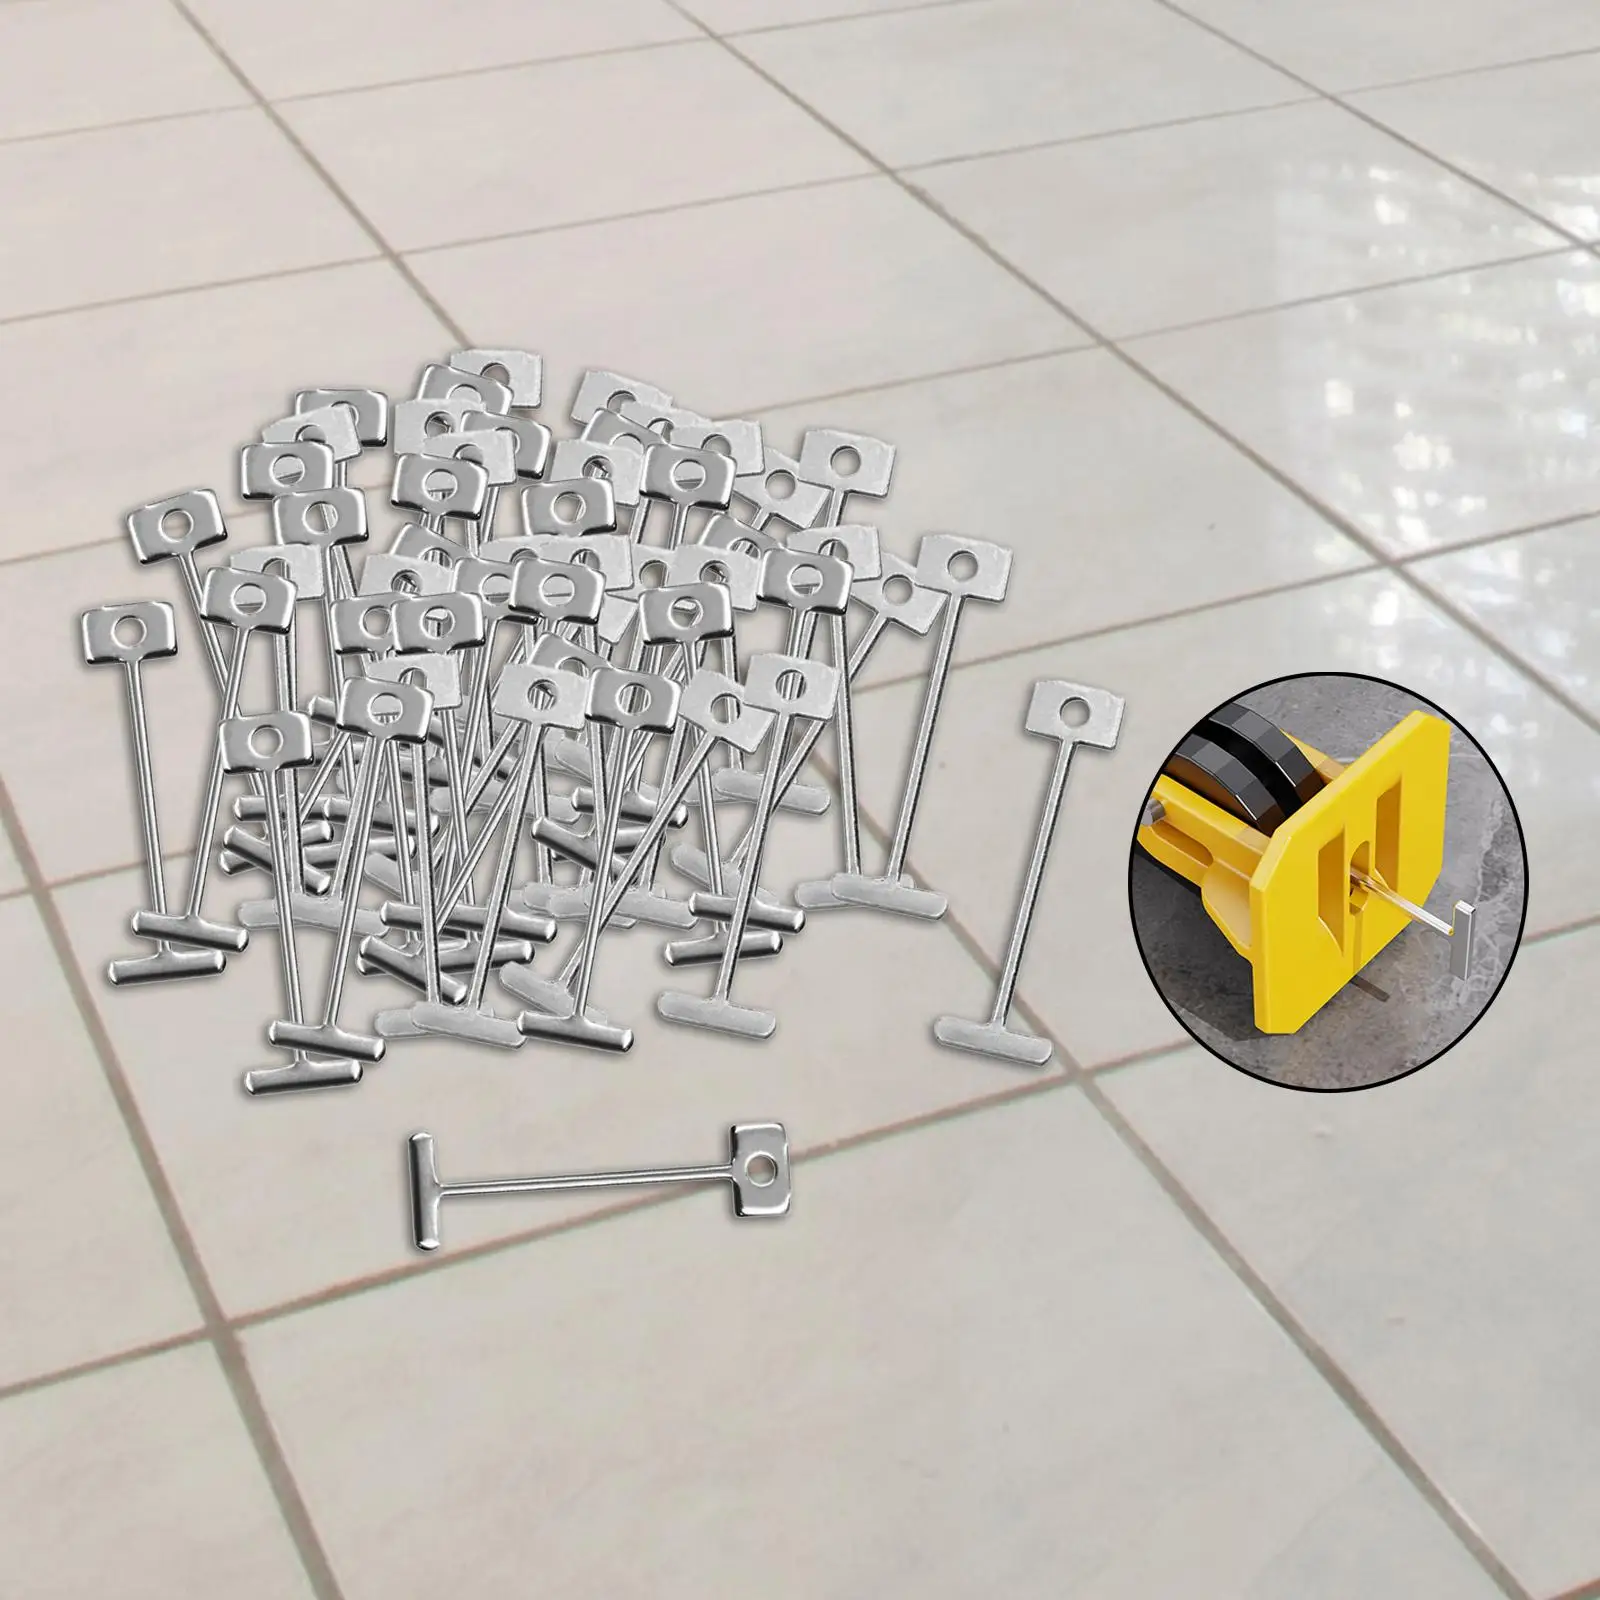 50Pcs Tile Leveling System Labor Saving High Pins for Builing Walls & Floors